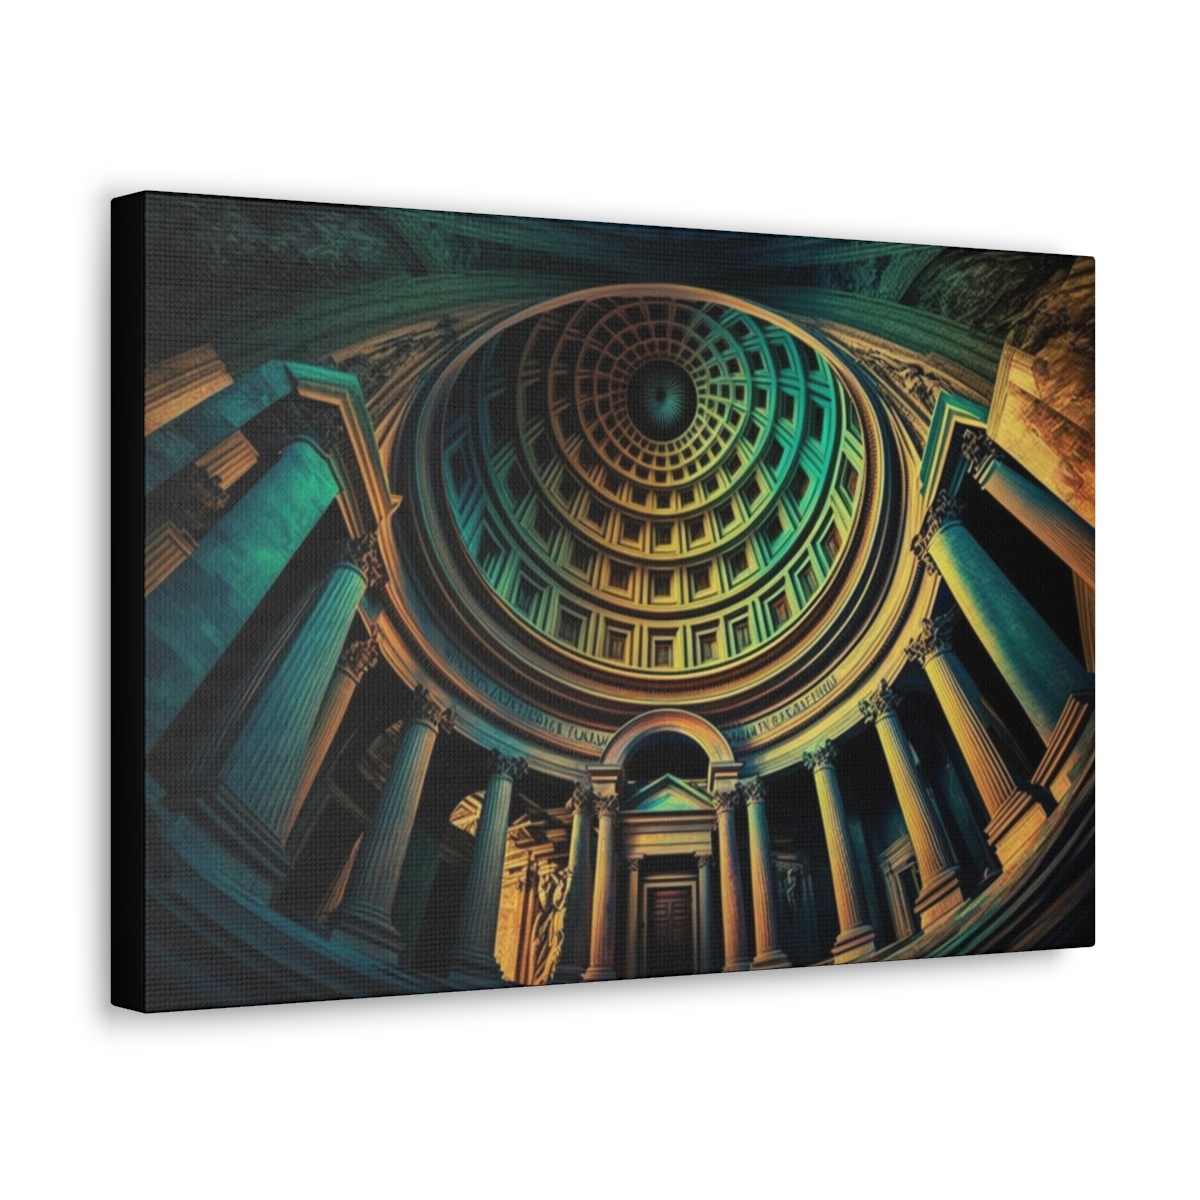 Trippy Art Canvas Print: The Great Dome